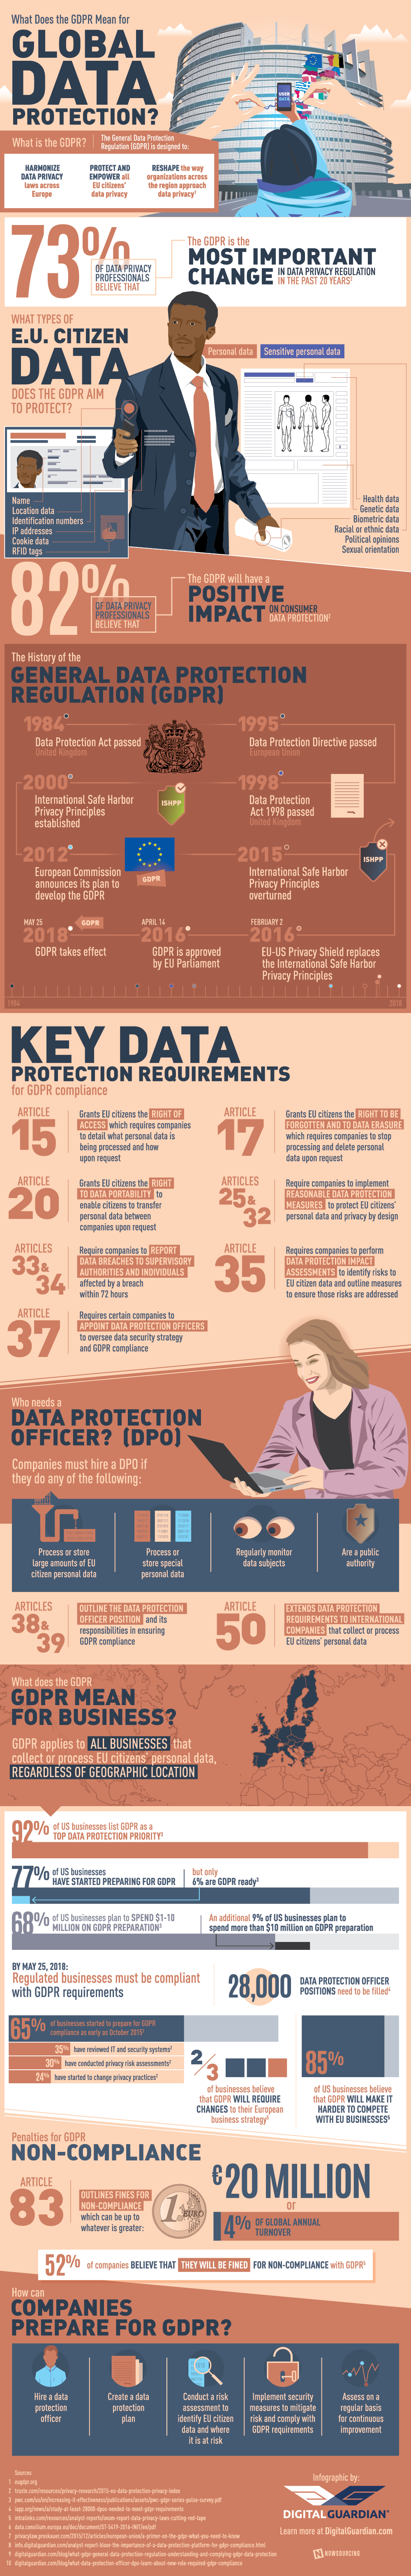 gdpr-global-data-protection-infographic.png